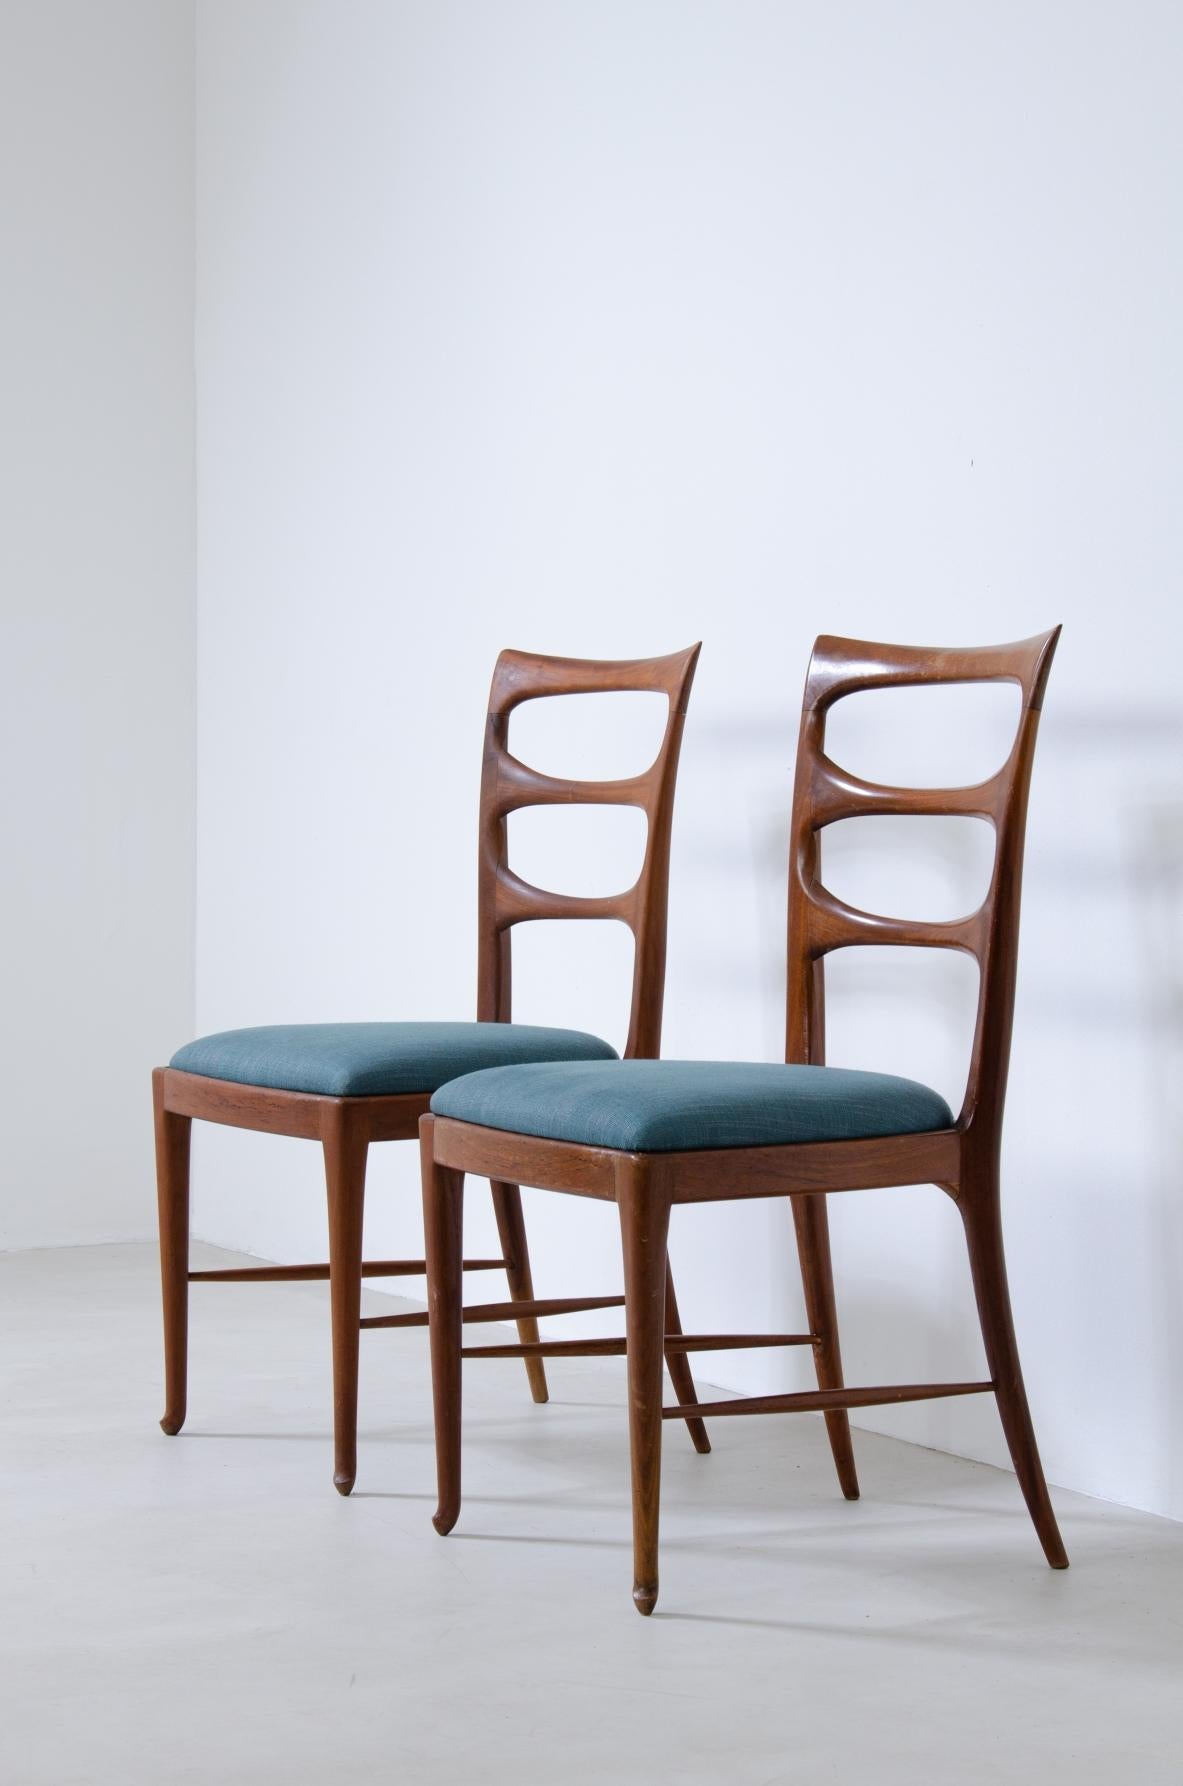 Paolo Buffa (1903-1970)

Set of six elegant dining chairs in walnut with nice carved back and upholsterd seat.
Manifactured by Serafino Arrighi, Italy, 1950's.

Bibl. Mobili di Paolo Buffa.

